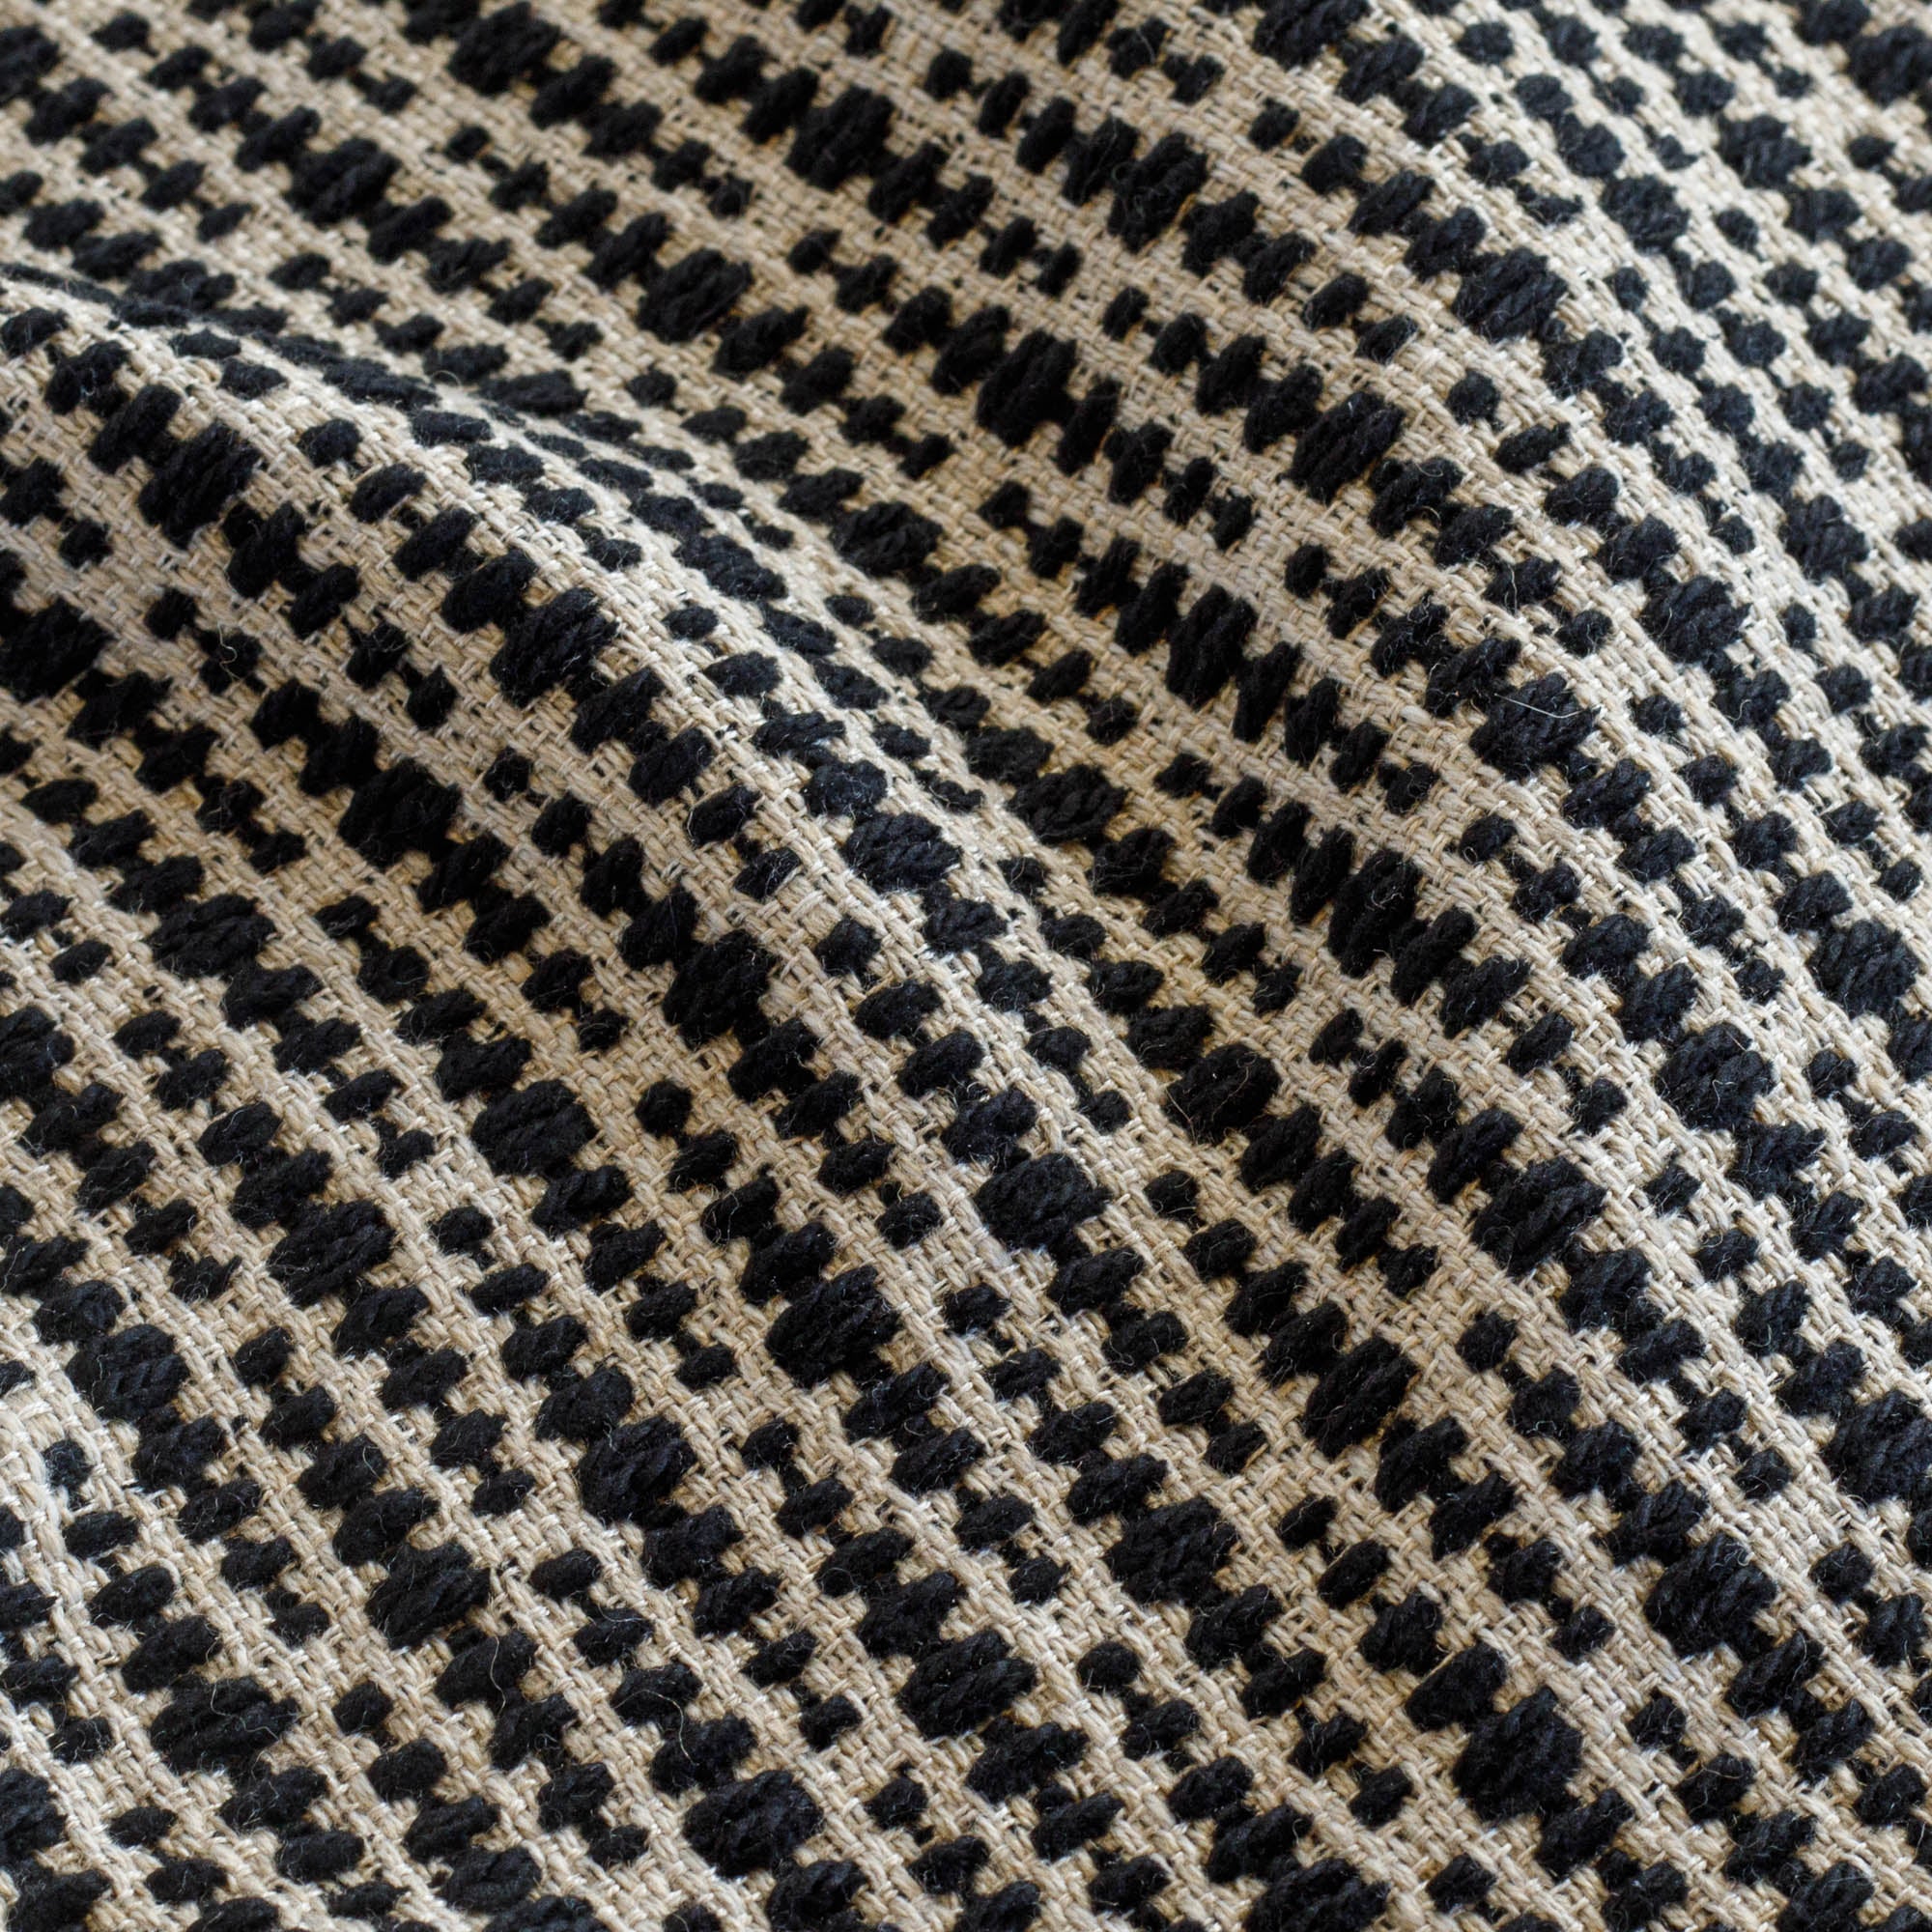 a black and tan textured geometric patterned home decor fabric : close up view